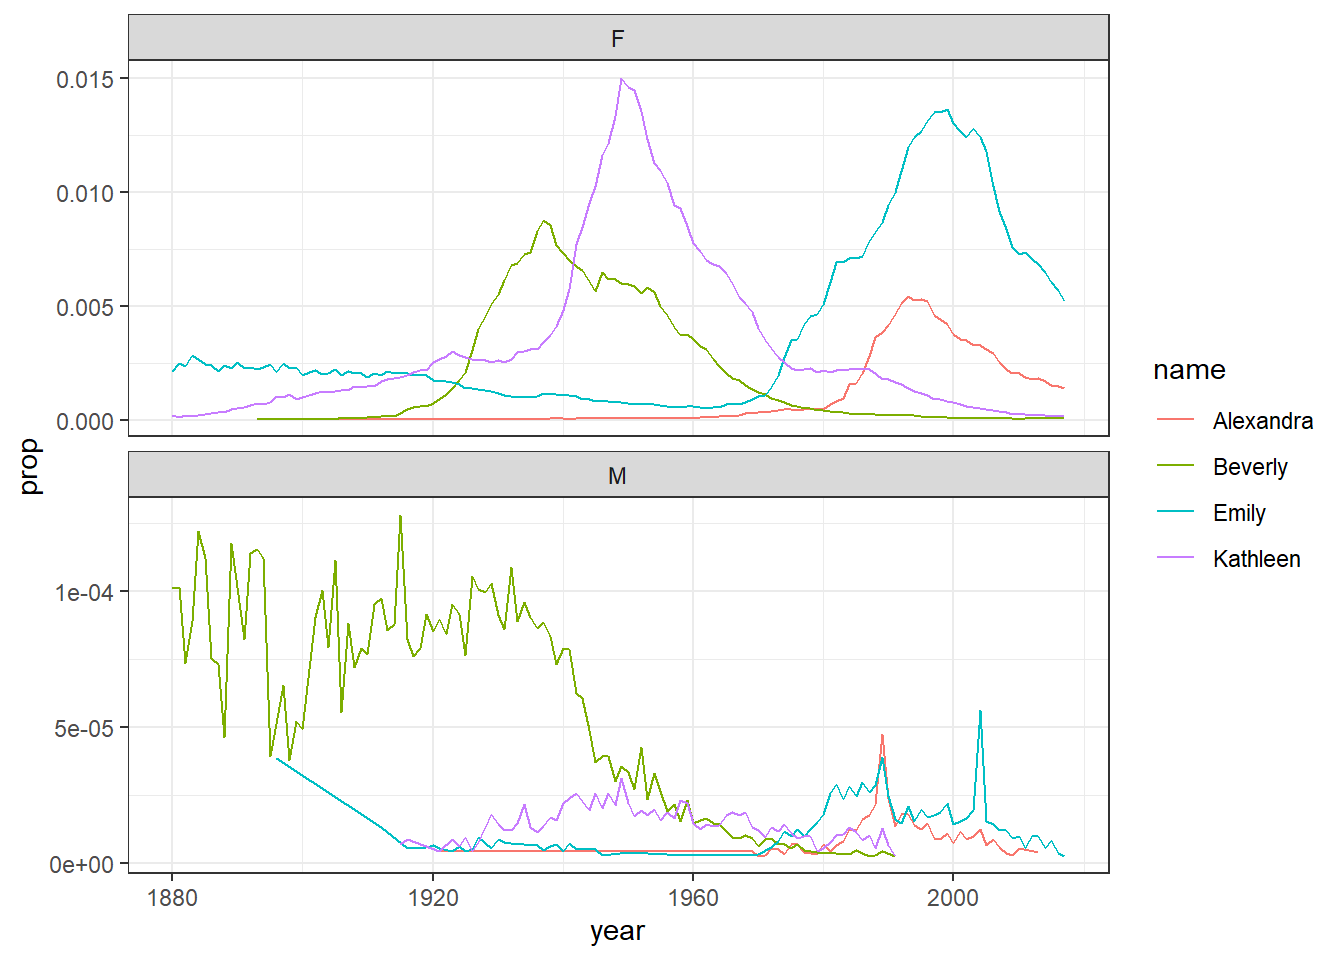 Plots by sex with different scales